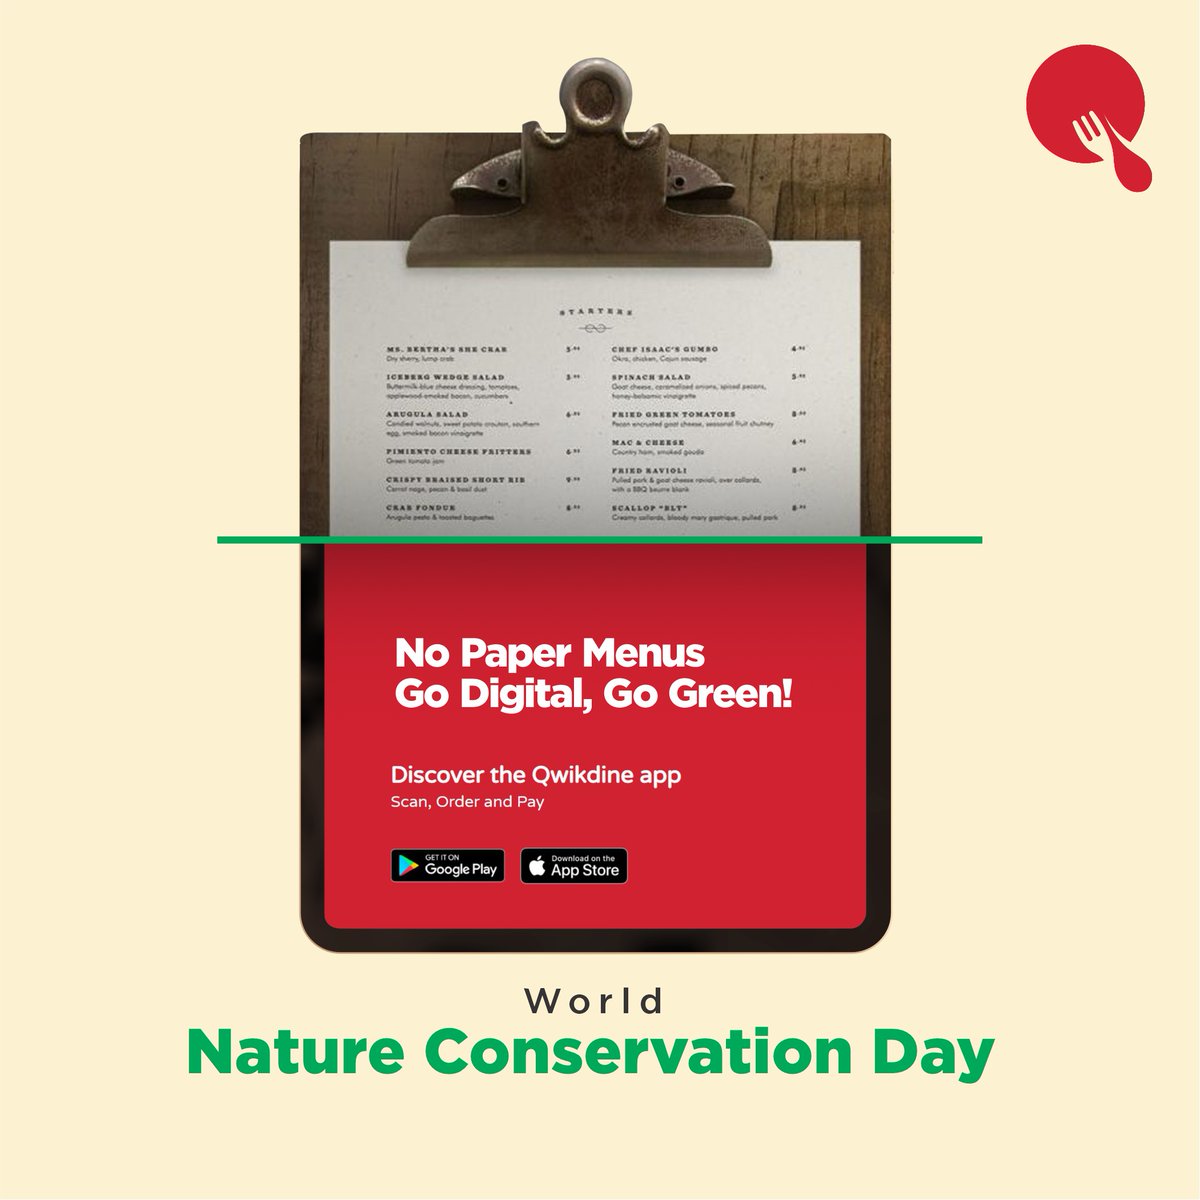 On this #WorldNatureConservationDay, let us pledge to do a bit
for the planet Earth by avoiding using paper menus and paper bills and
#GoDigital

 #ContactlessDining #ContactlessMenu
#SafeDining #DigitalMenu #QRCode #StaySafe #Dinein #Qwikdine #ScanOrderPay #QwikdineUAE